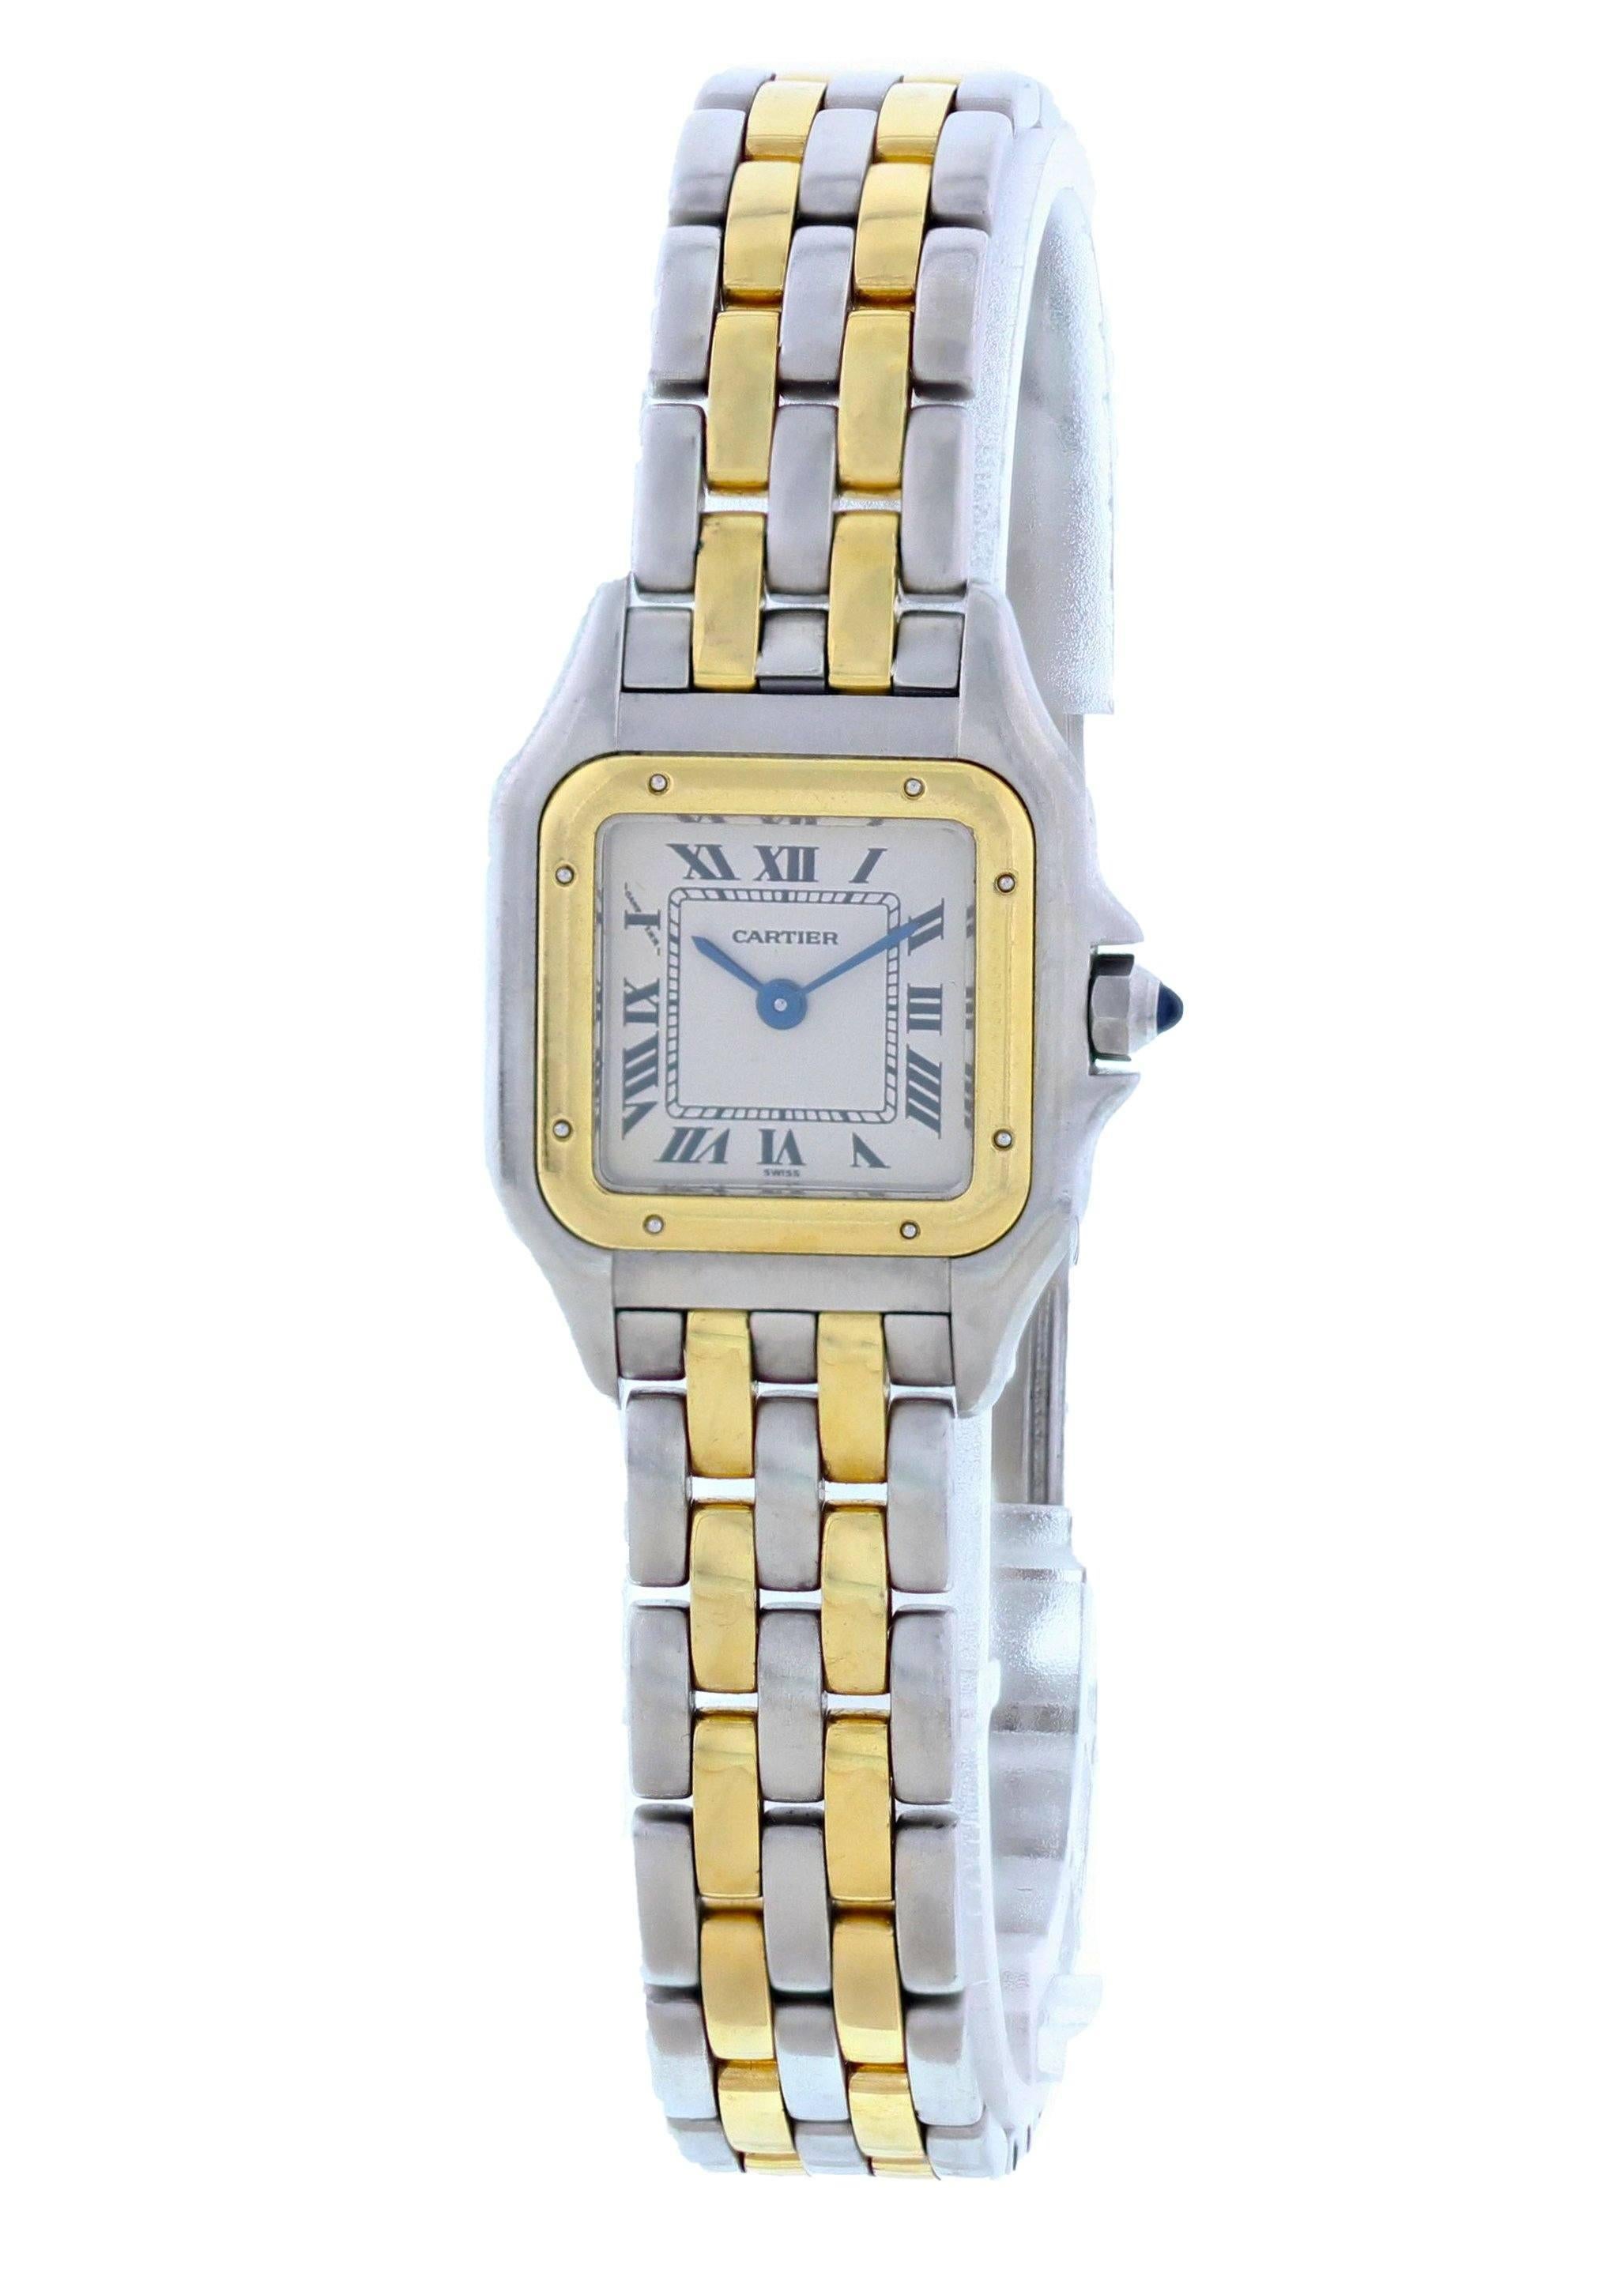 Cartier Panthere 112000R Ladies Watch.
22mm Stainless Steel case. 
Yellow Gold Stationary bezel. 
Off-White dial with Blue steel hands and Roman numeral hour markers. 
Minute markers on the outer dial. 
Stainless Steel bracelet with Butterfly Clasp.